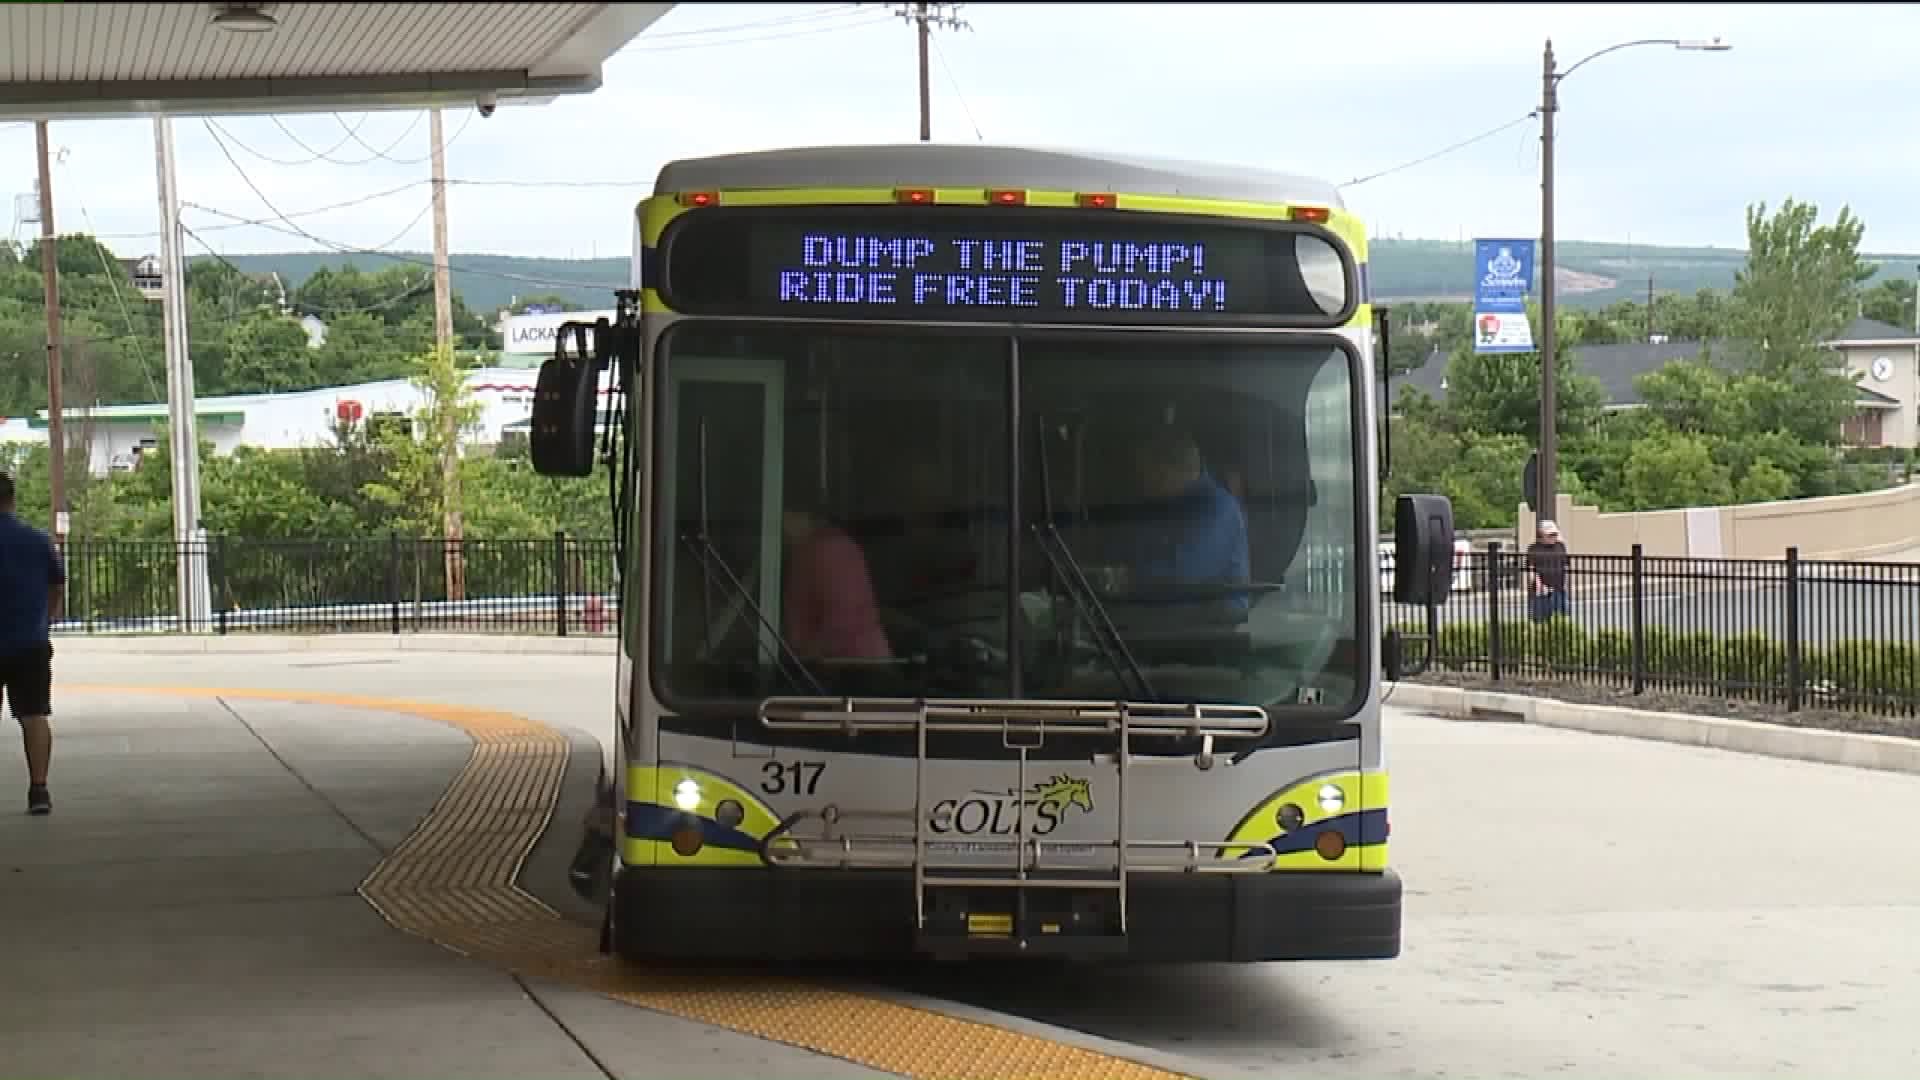 Free Bus Rides in Lackawanna County for 'Dump the Pump'